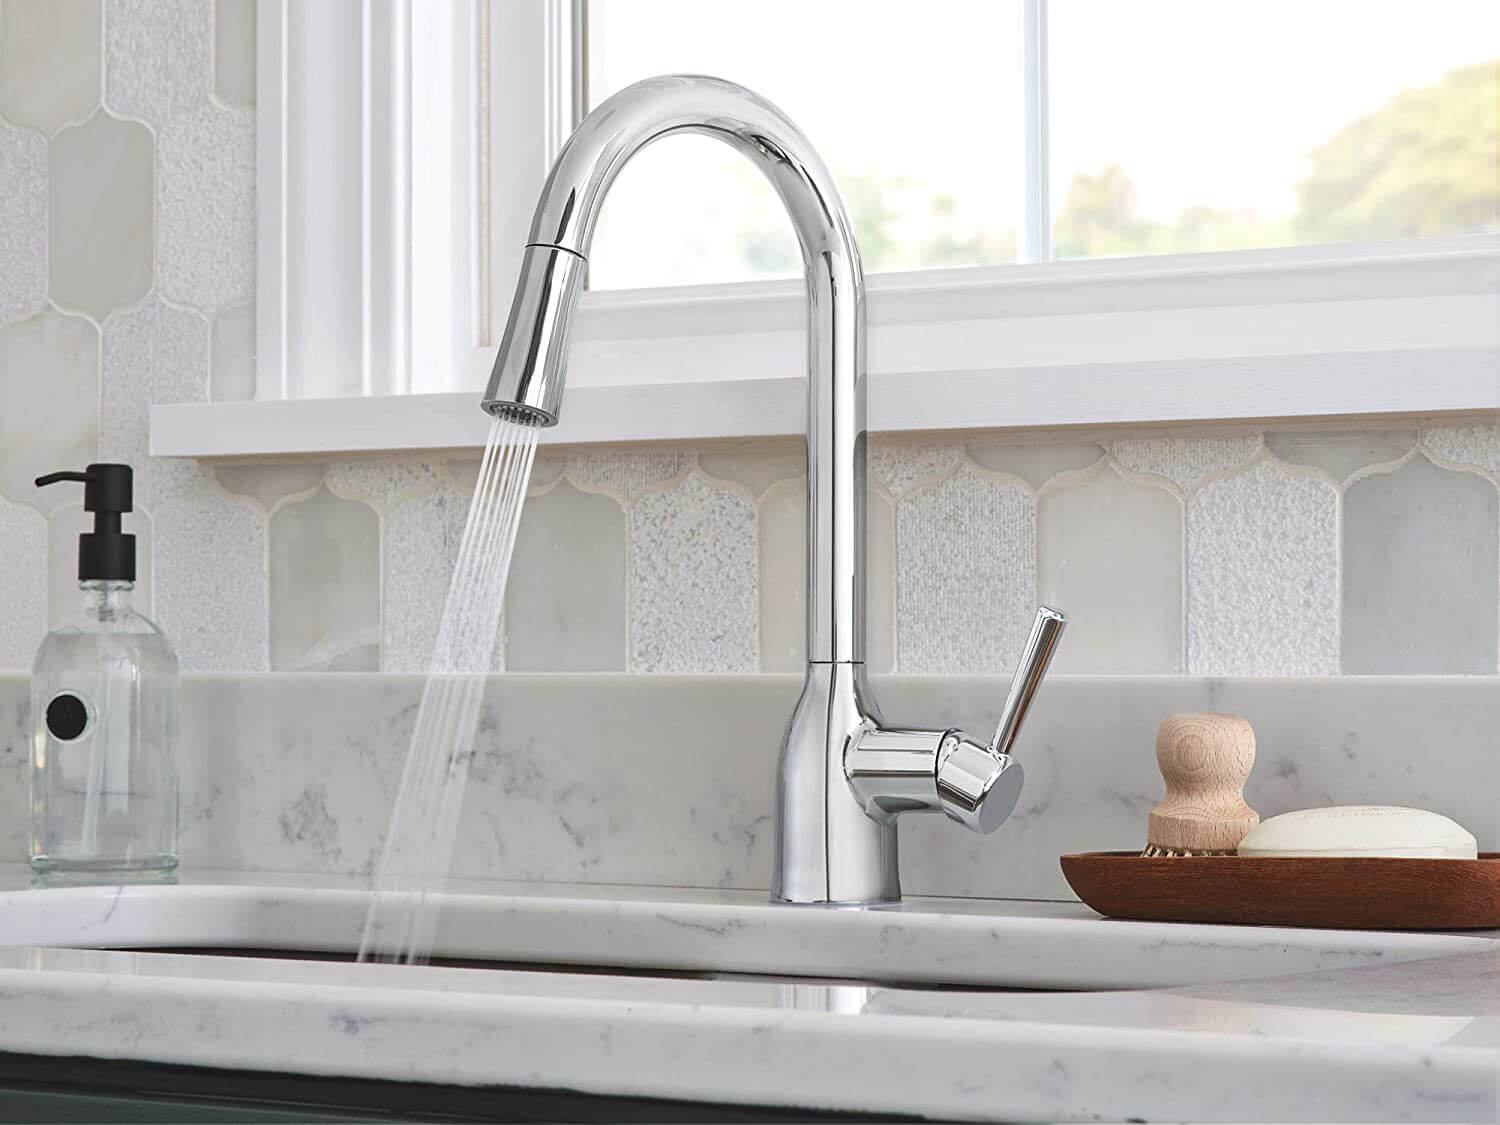 wowow-single-handle-high-arc-chrome-pull-down-kitchen-faucet (8)